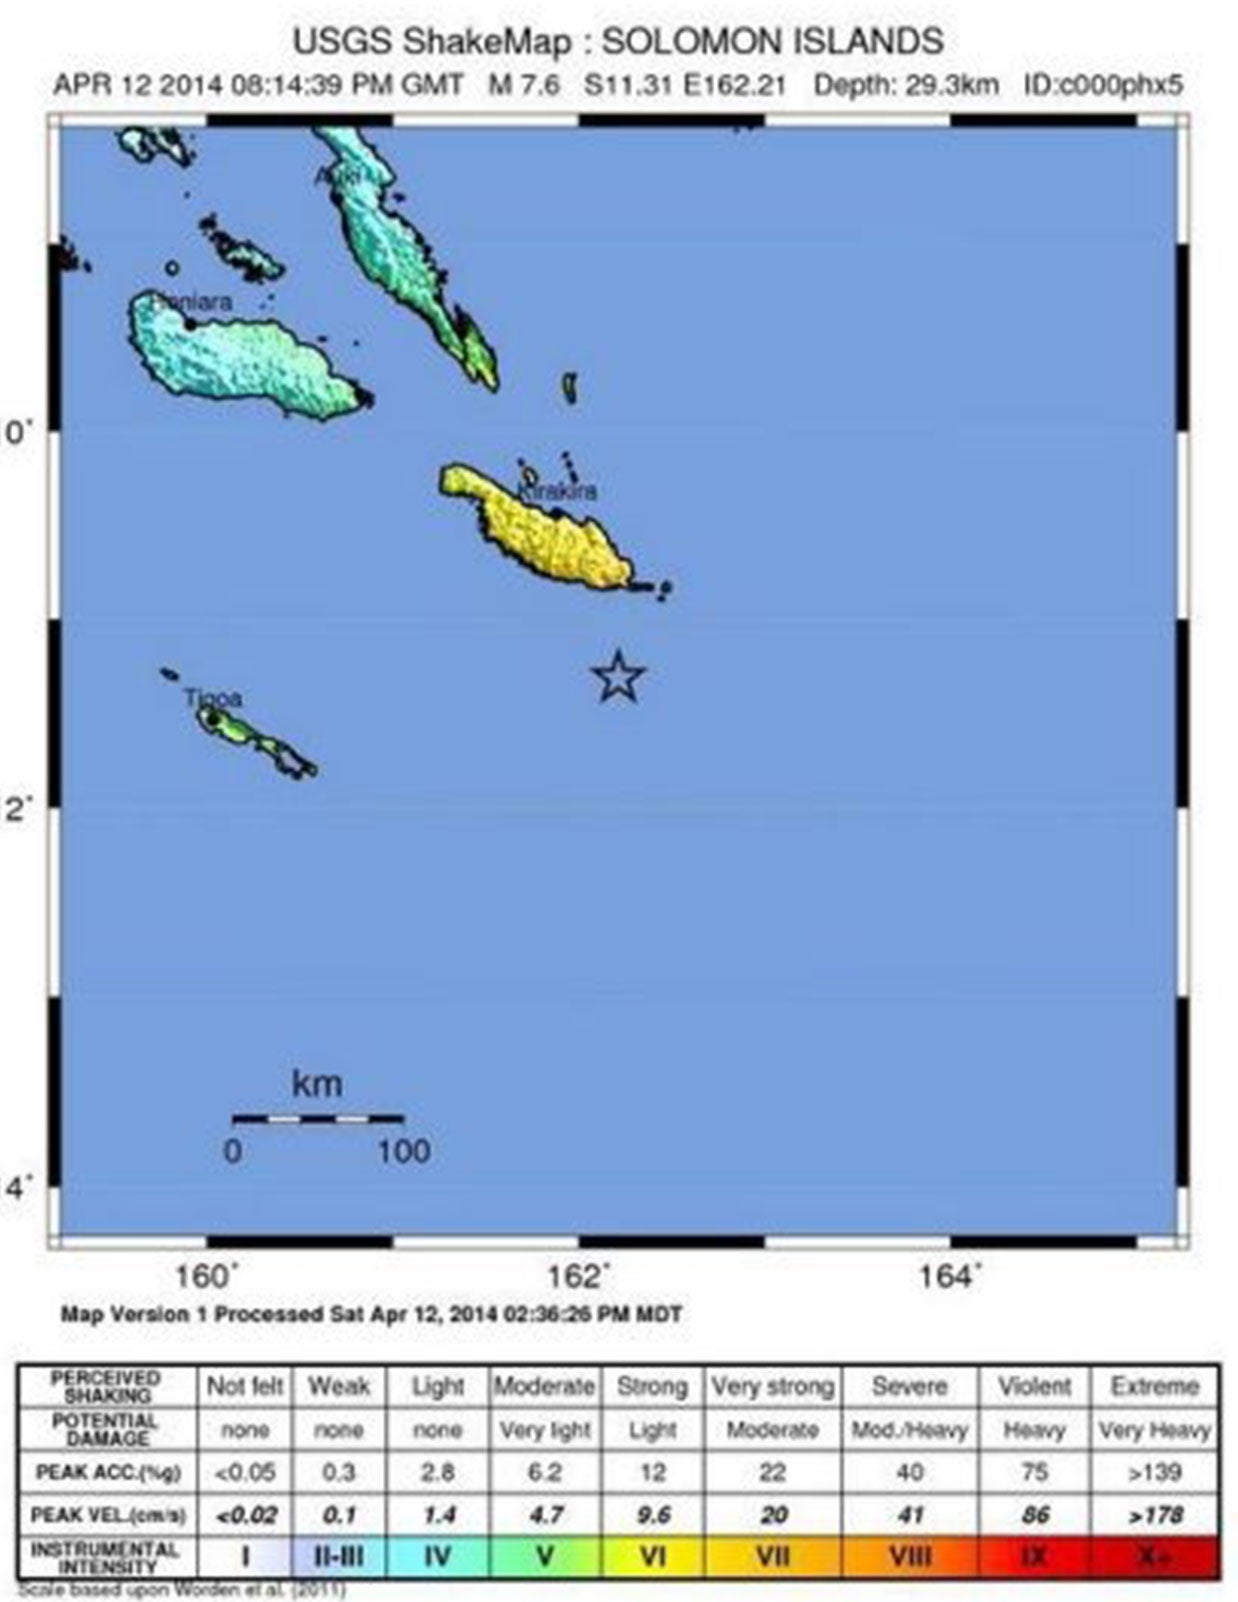 A shakemap showing the location and intensity of an earthquake near the coast of the Solomon Islands